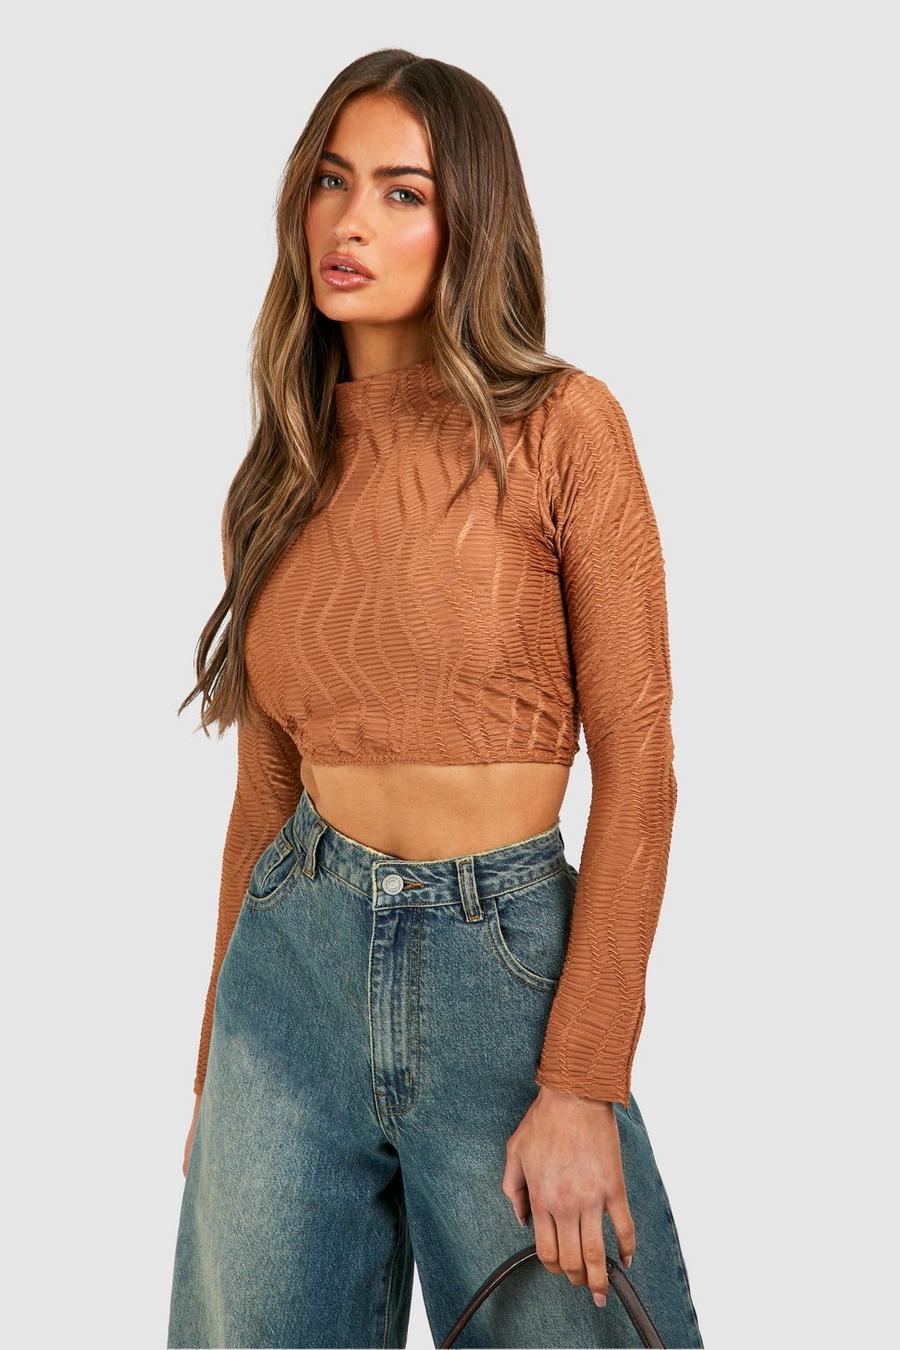 High Neck Tops for Women - Up to 60% off